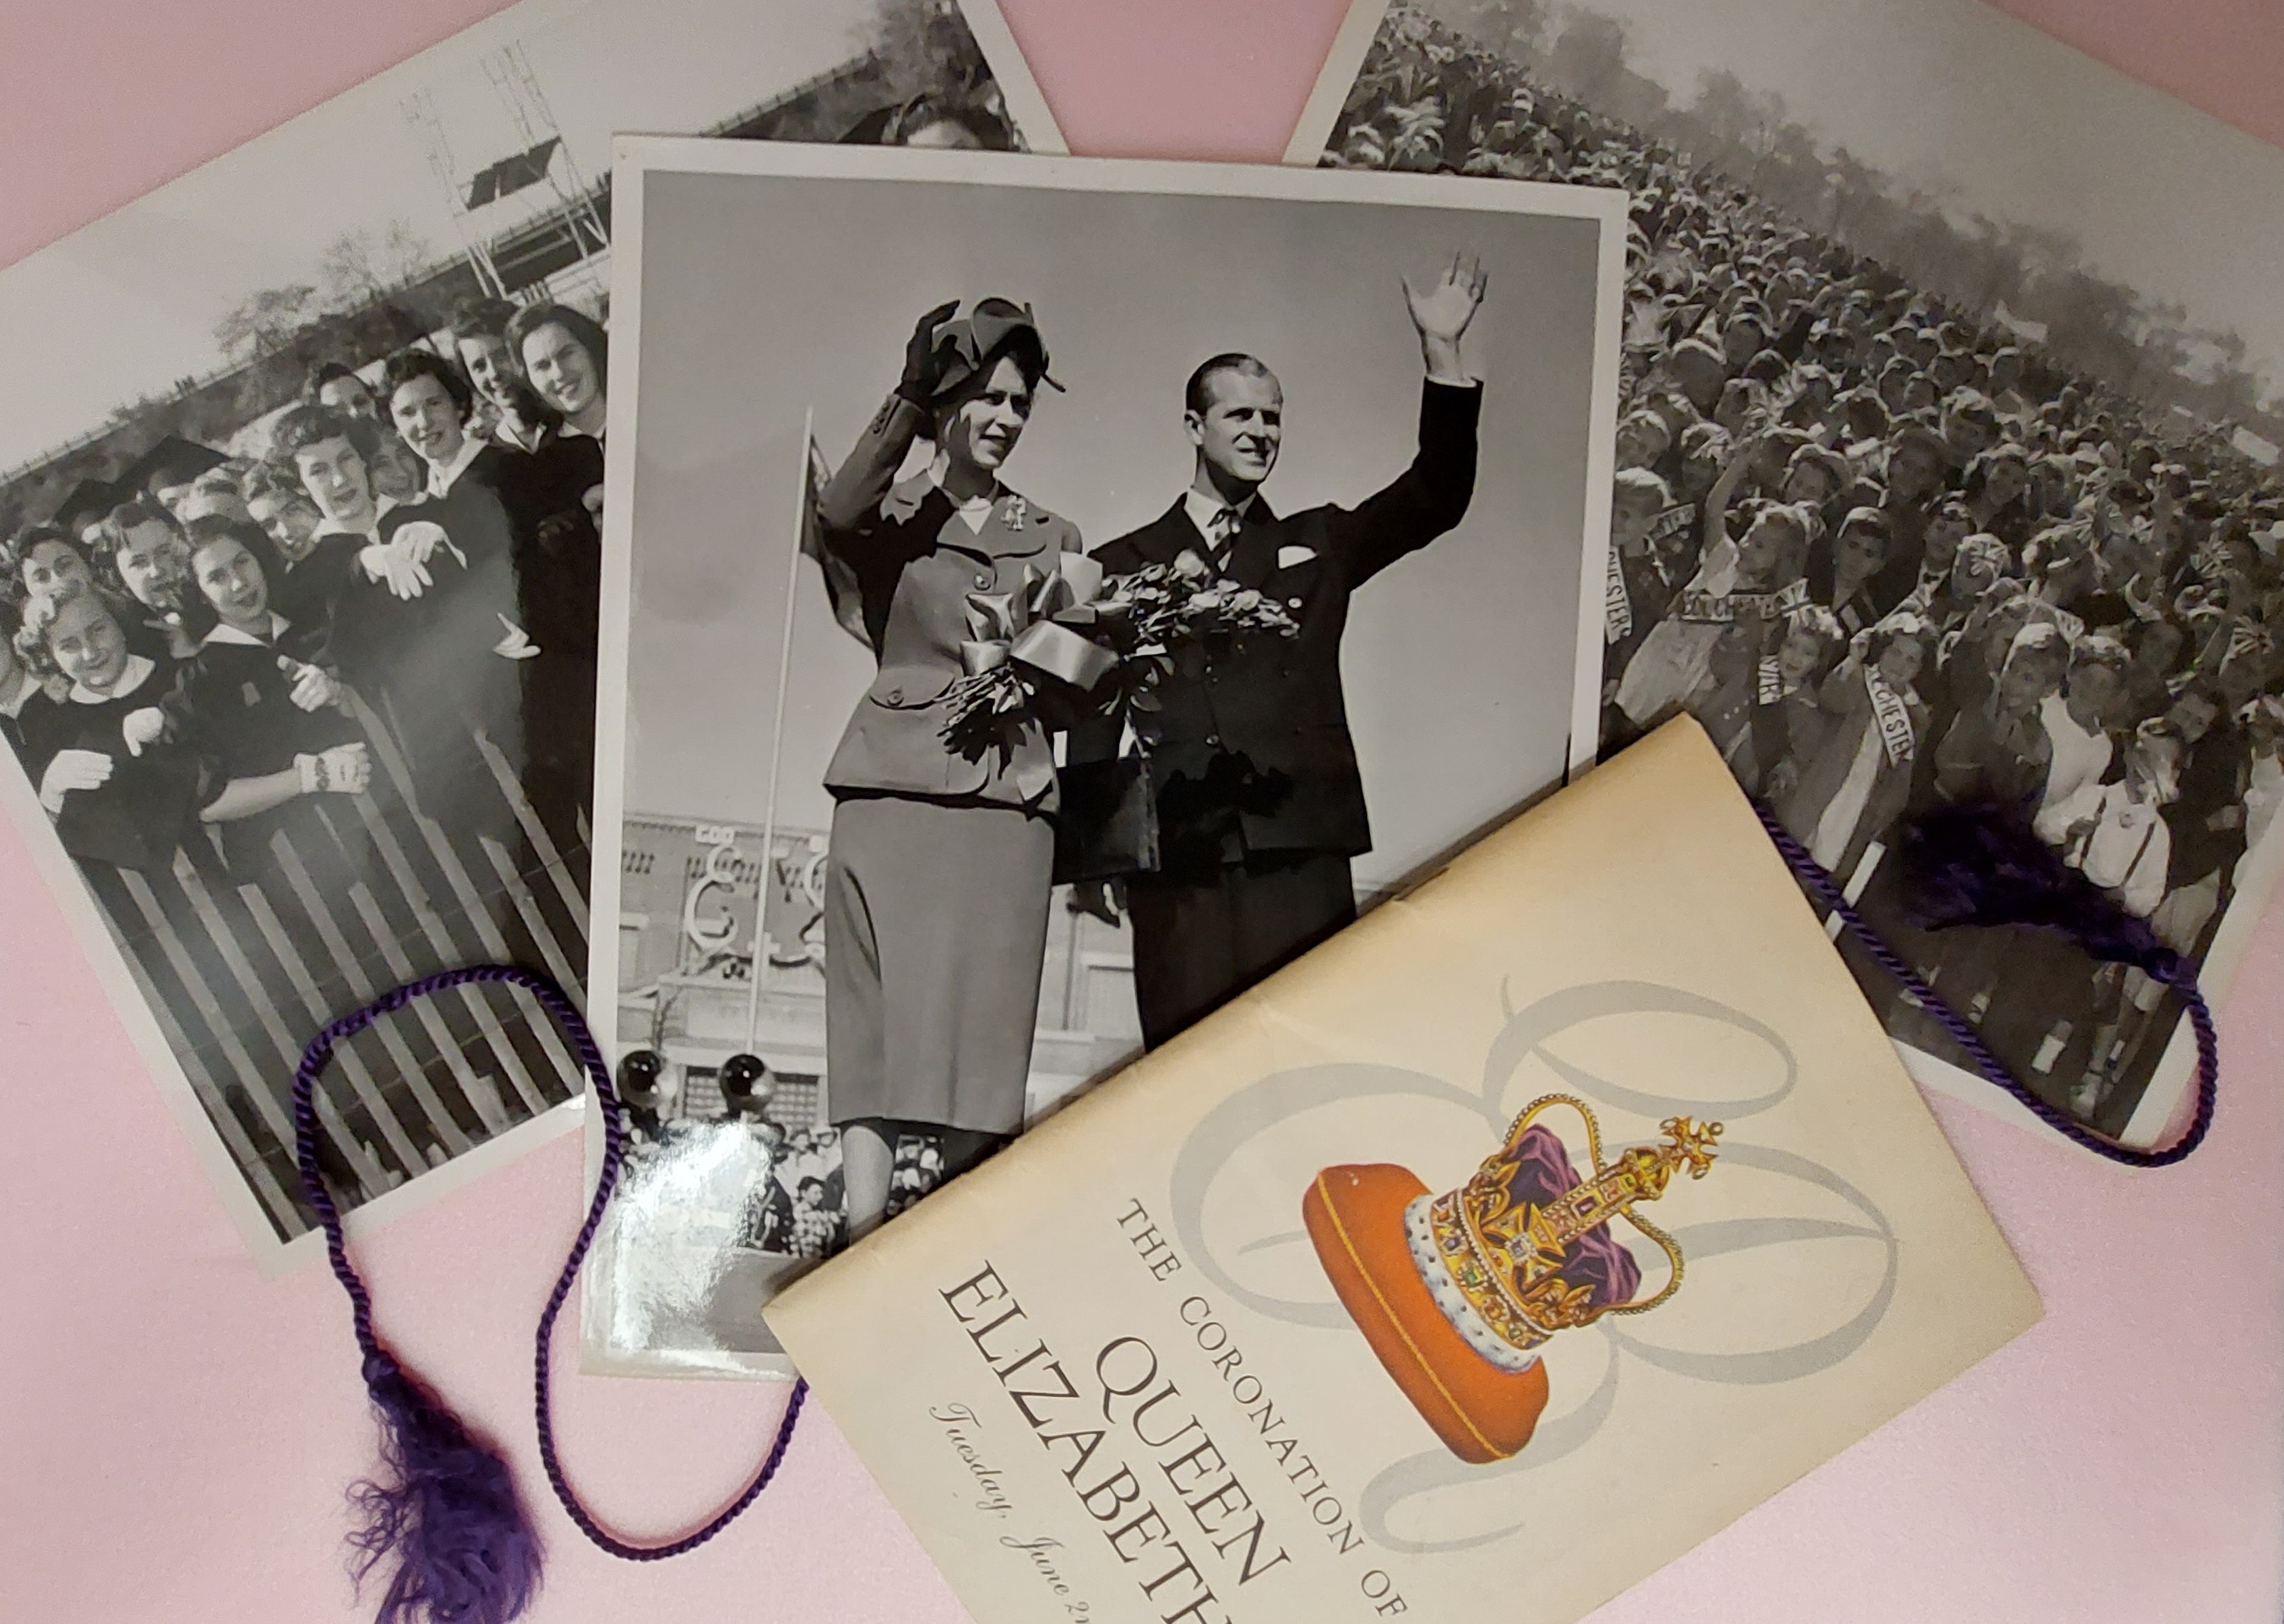 Historic photos of a 1951 visit by Queen Elizabeth II and a booklet commemorating her 1953 coronation.